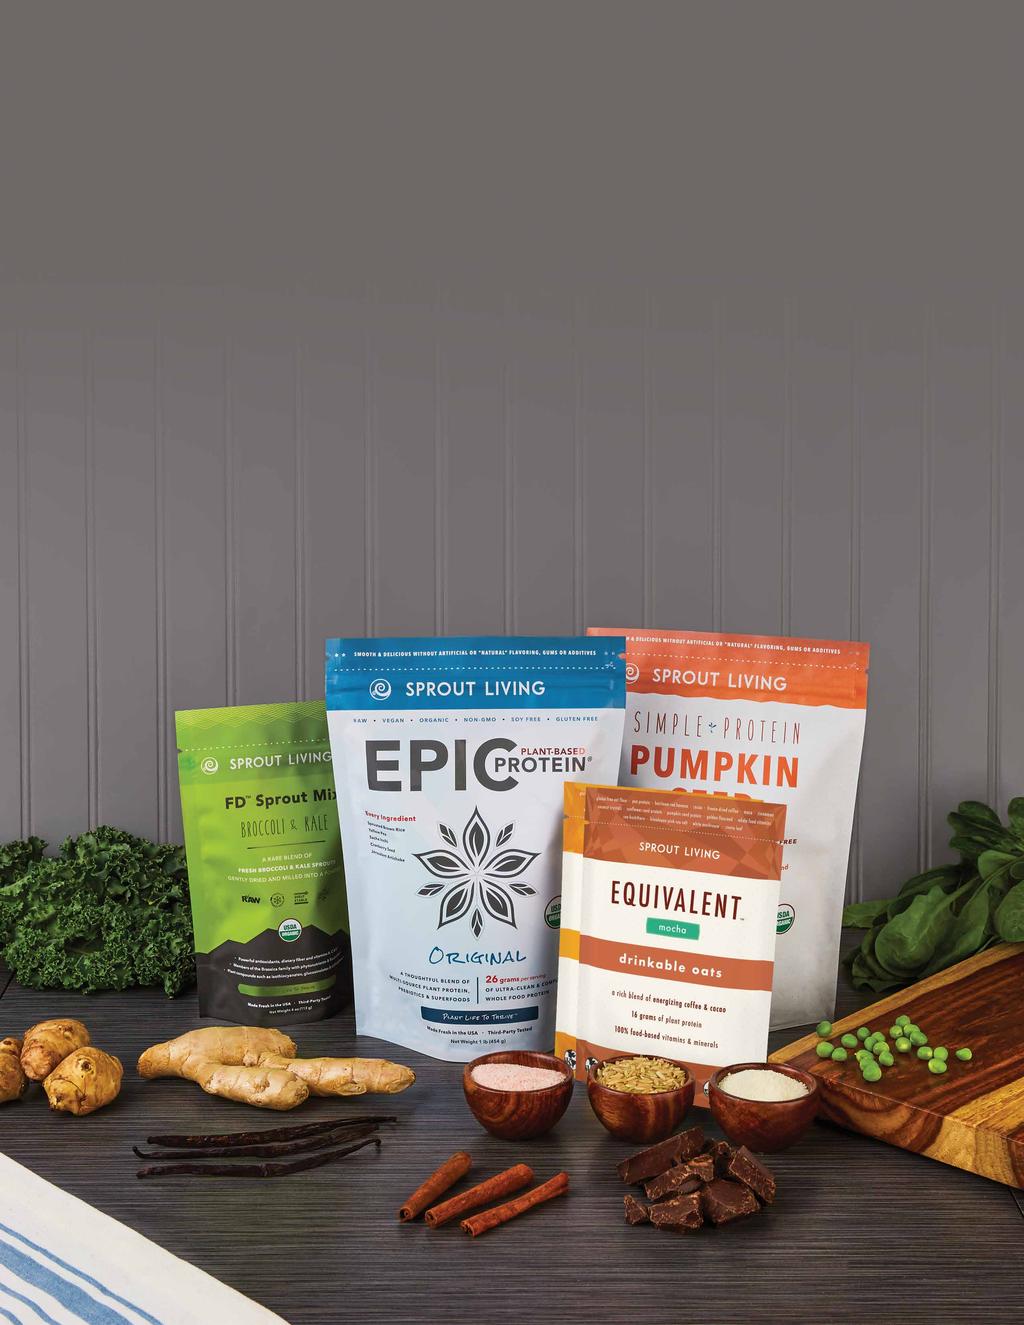 PRODUCT CATALOG 2017 Sprout Living crafts nutrient-dense, organic plant protein powders and functional foods made strictly from whole superfoods packed with vitamins, minerals, antioxidants and other